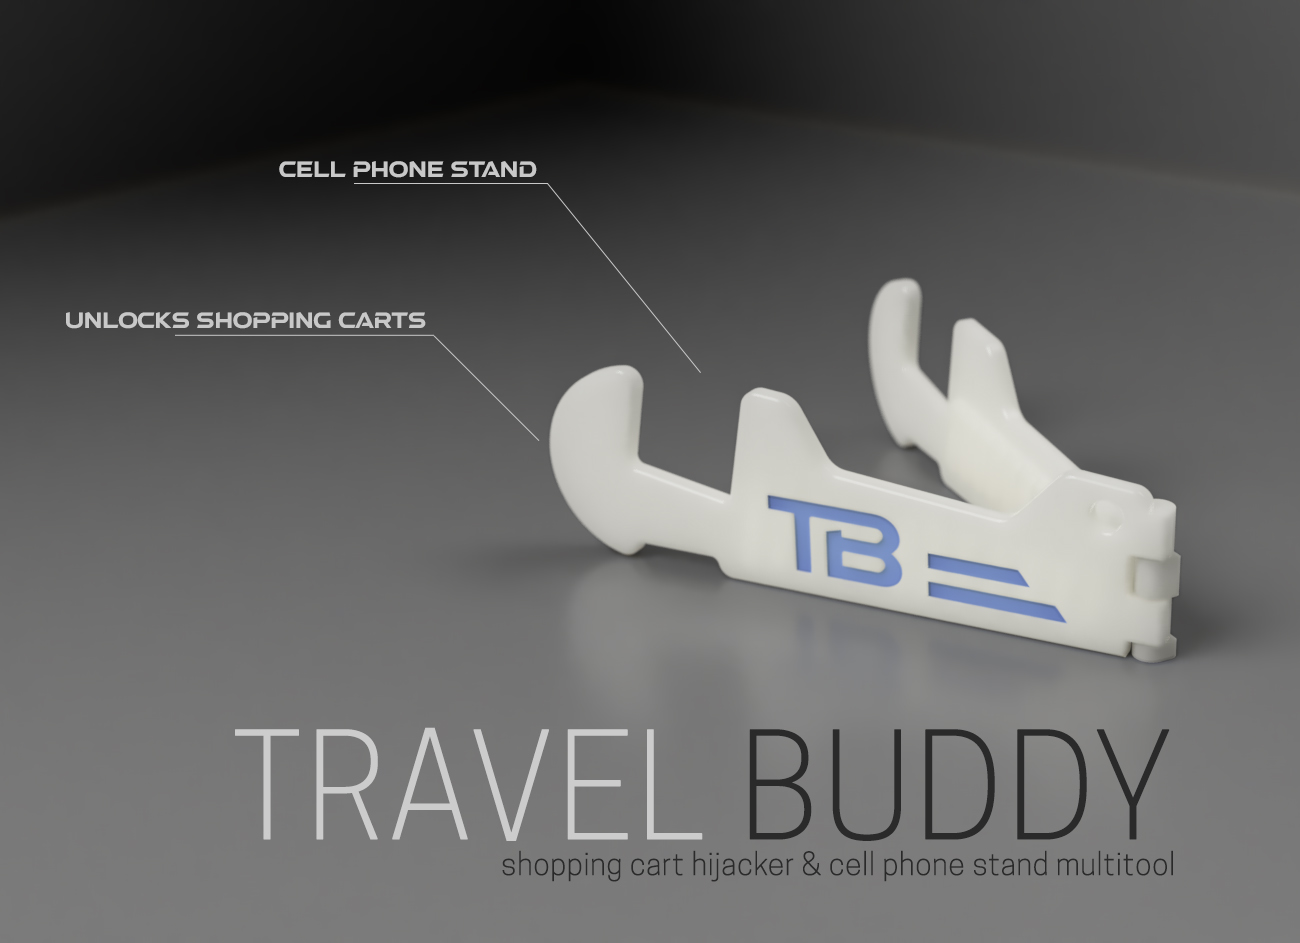 Travel Buddy - cell phone stand & shopping cart hijacker multitool - printed in place